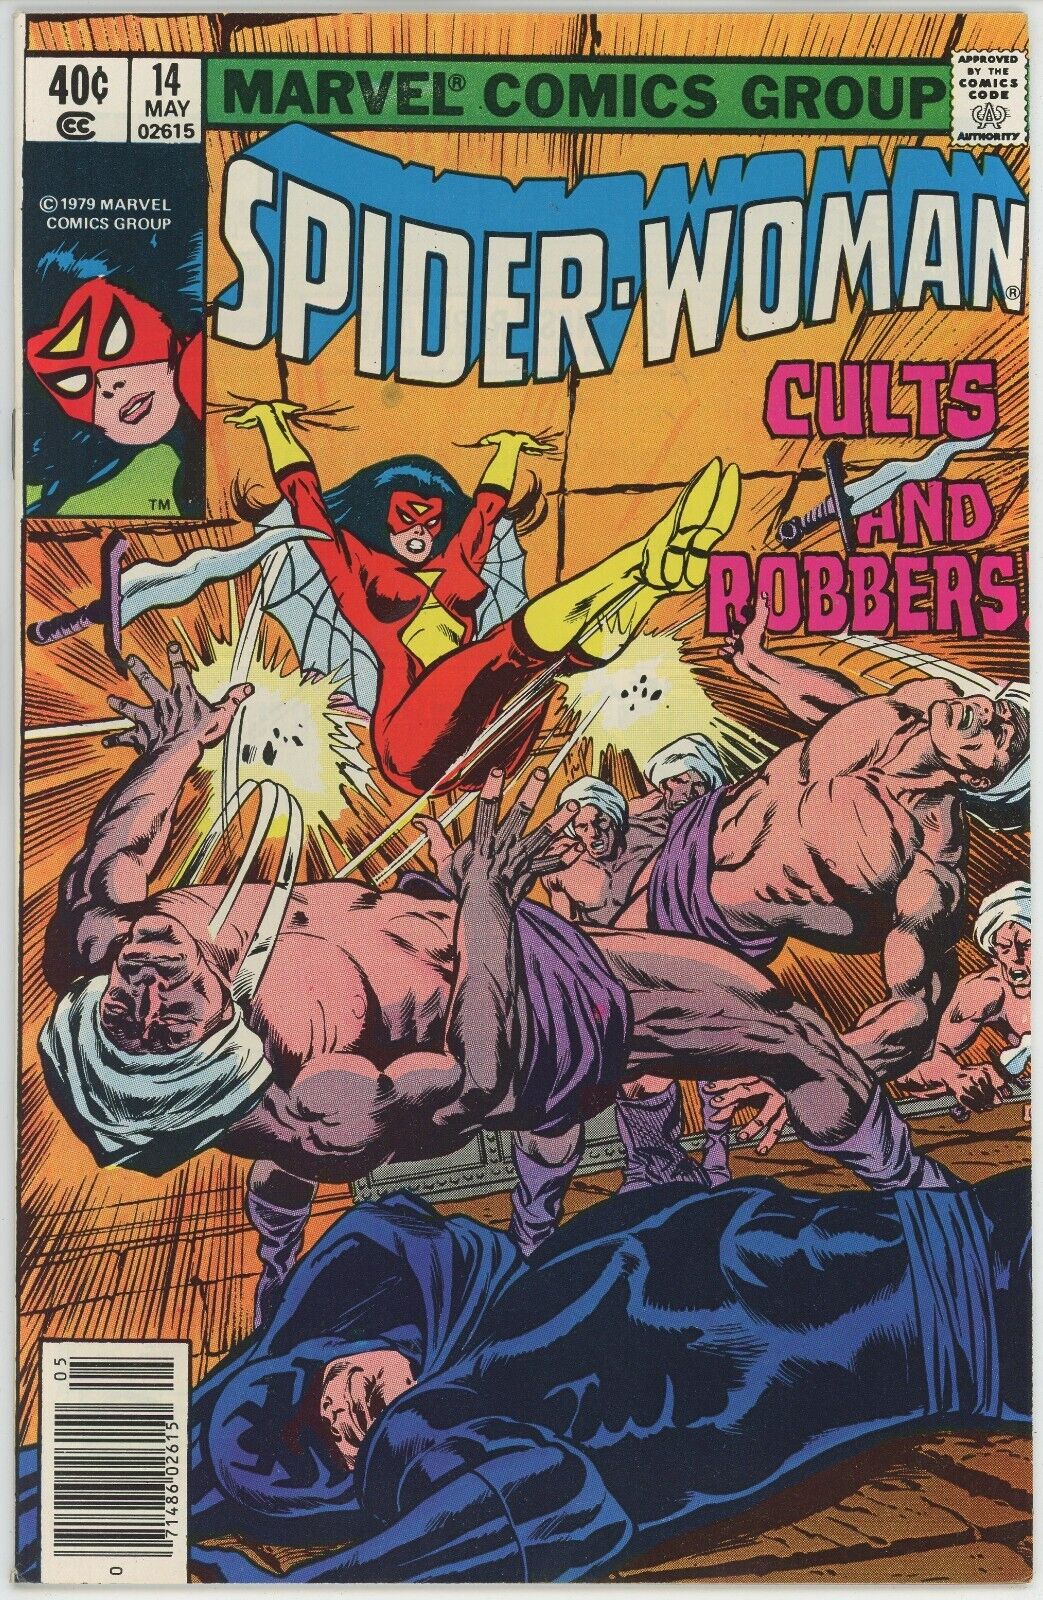 Spider Woman #14 (1978) - 9.0 VF/NM *Cults and Robbers* Newsstand